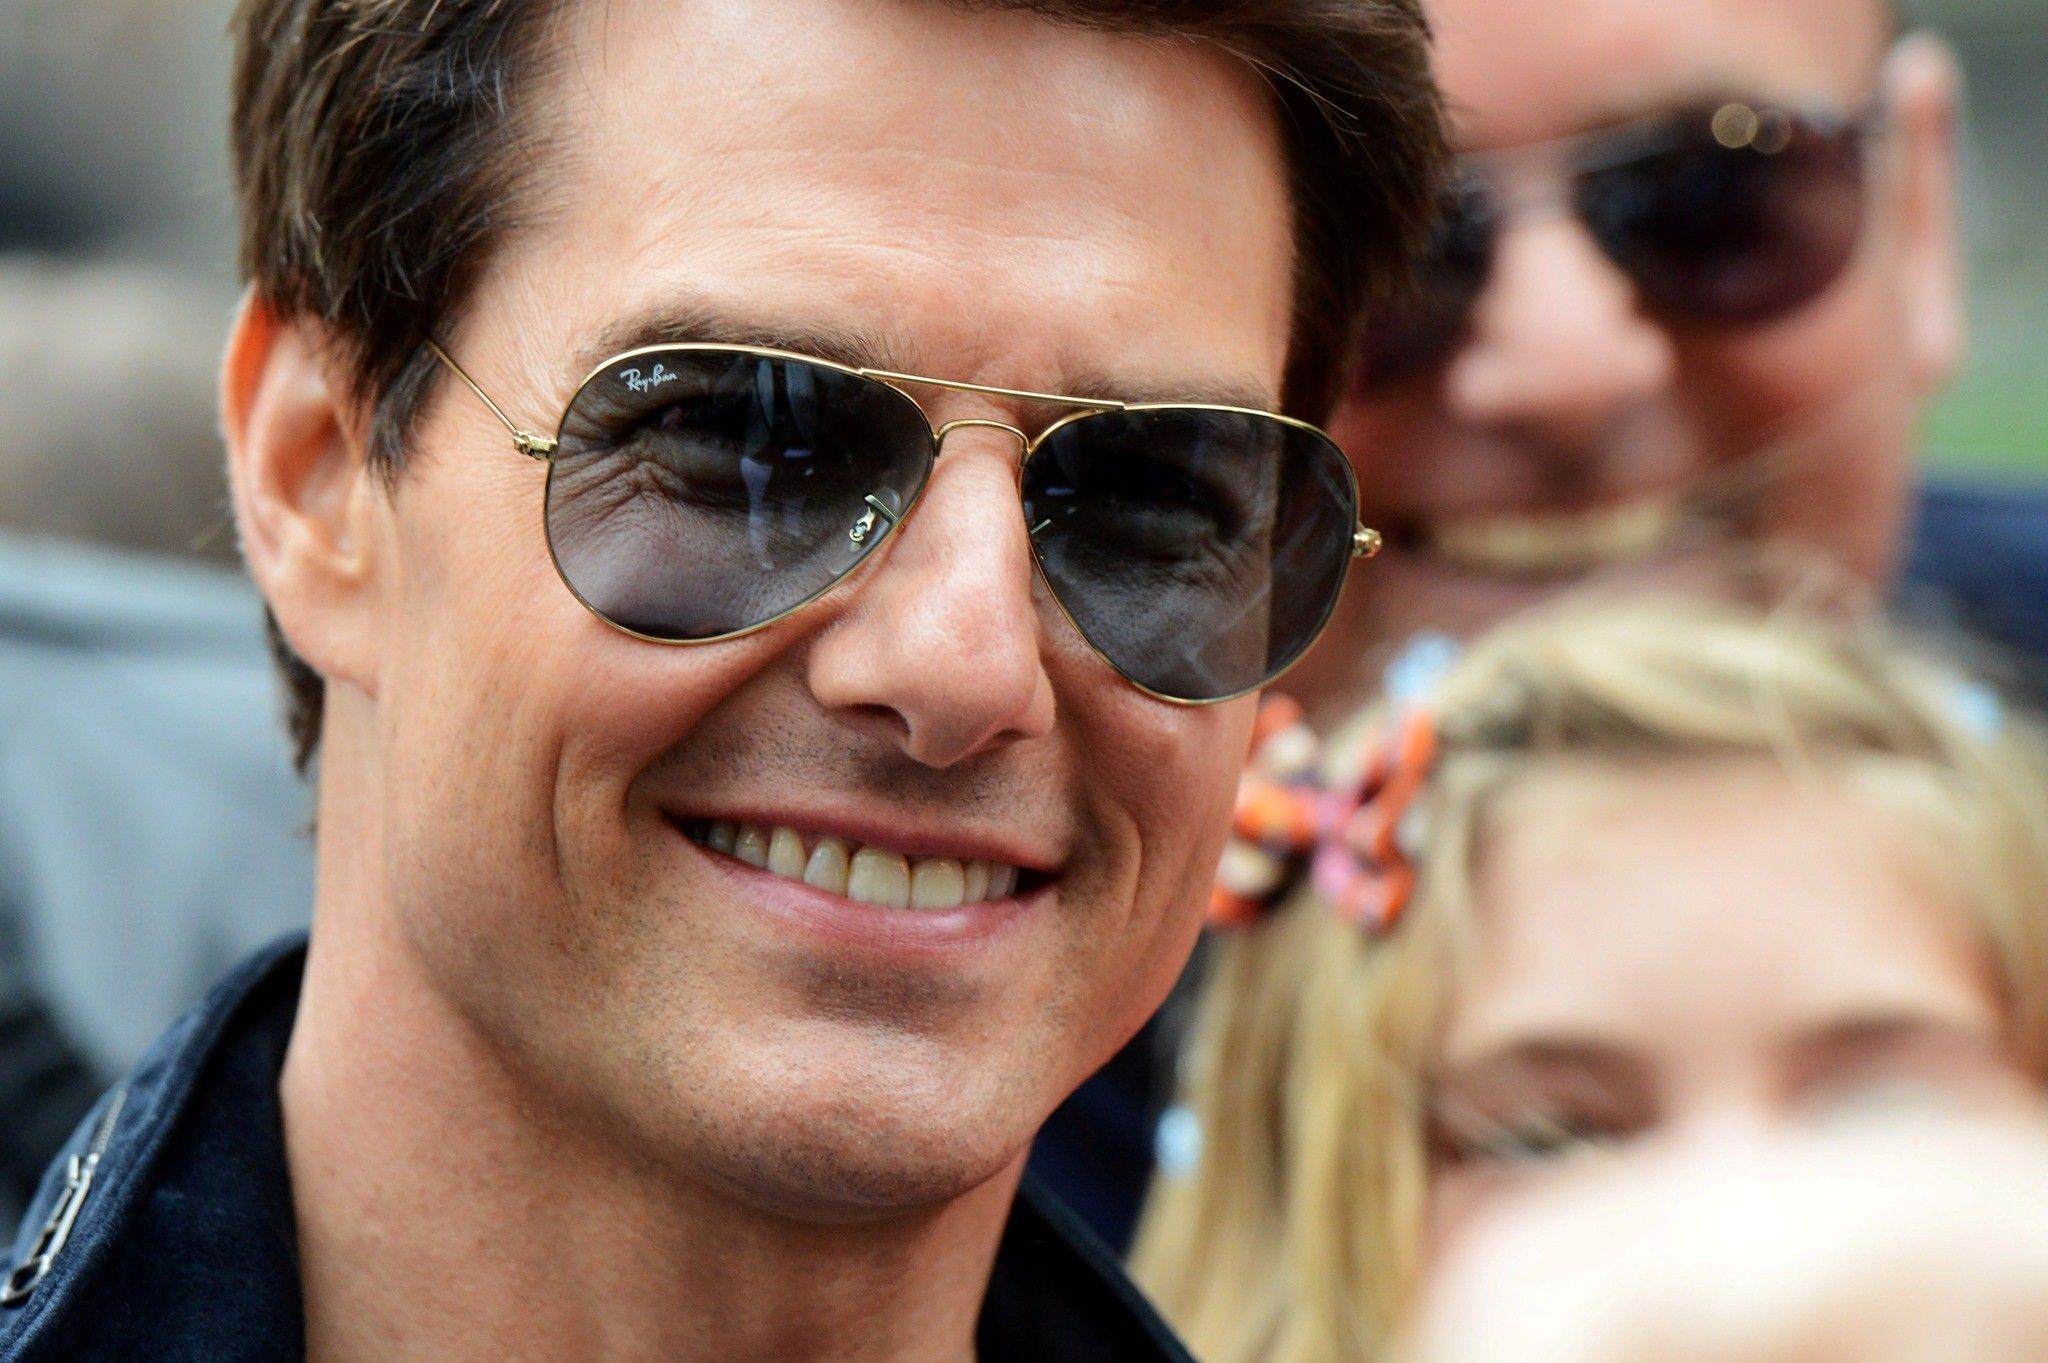 Smiling Face of Tom Cruise Hollywood Actor